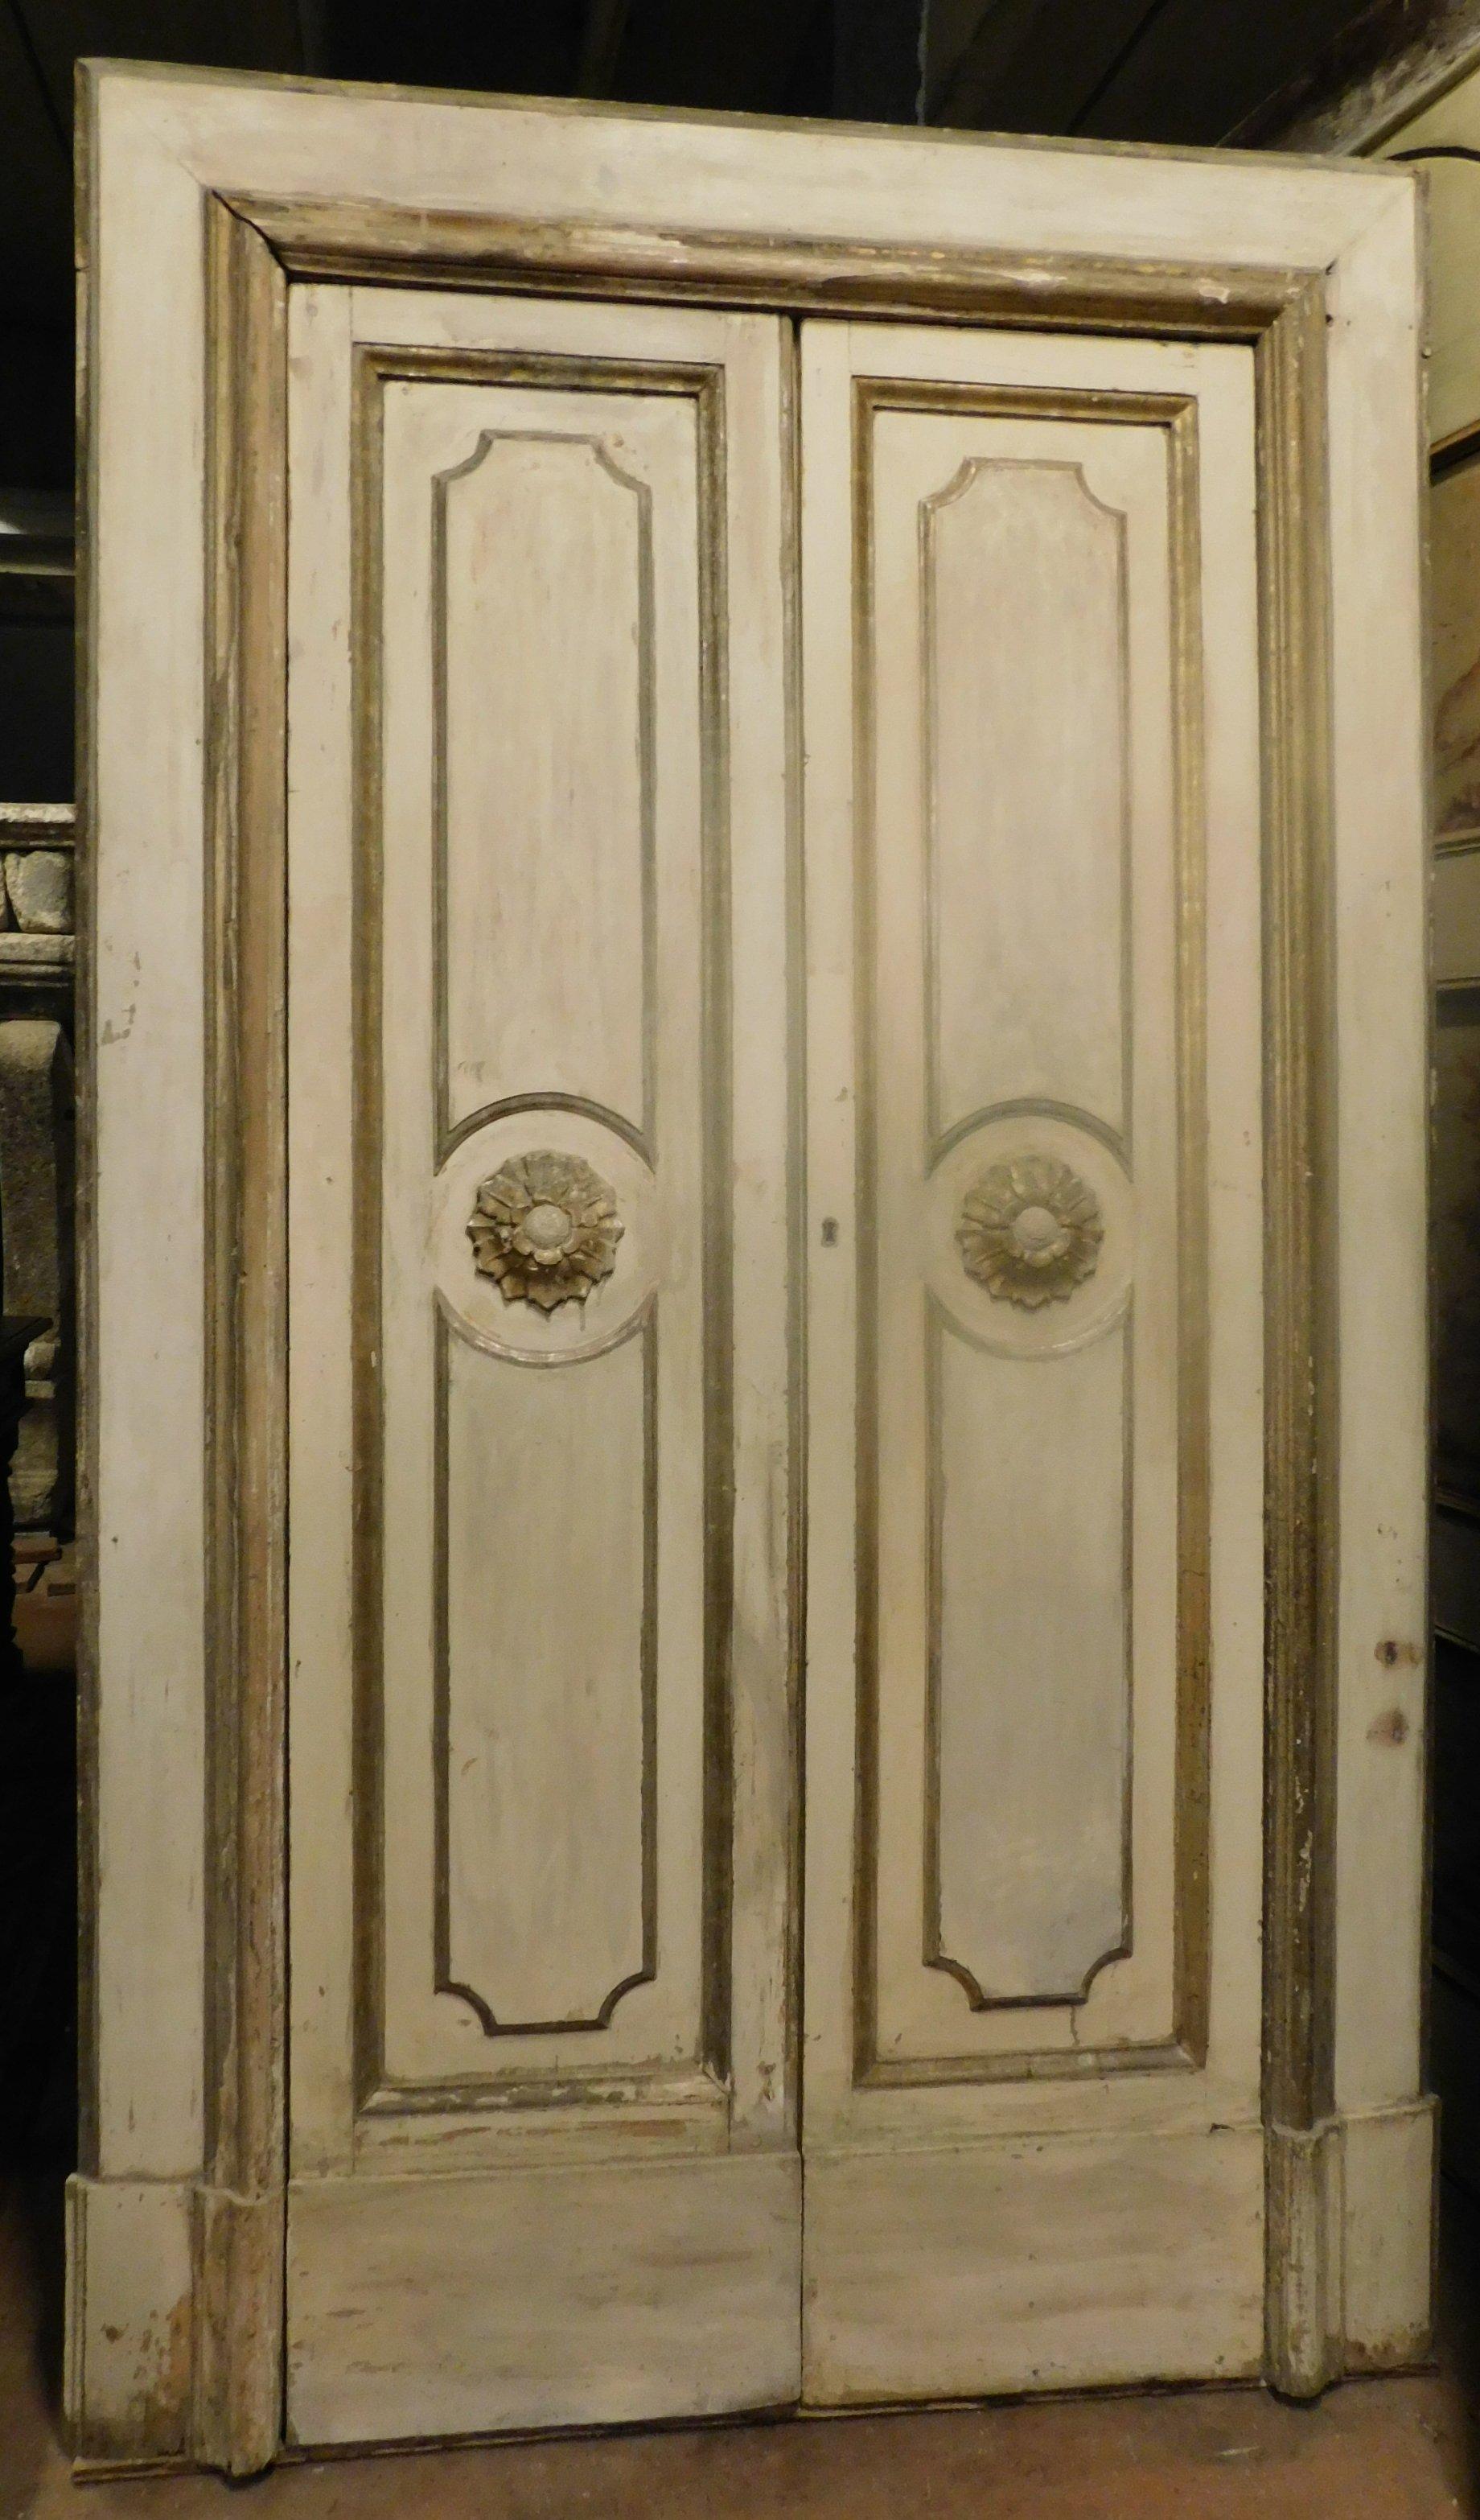 Set of 2 antique beige and gold lacquered doors, double-winged with original frame, lacquered, gilded and hand-sculpted with typical central rose window from the early 19th century, from a villa in Italy.
Back finished but to be lacquered,